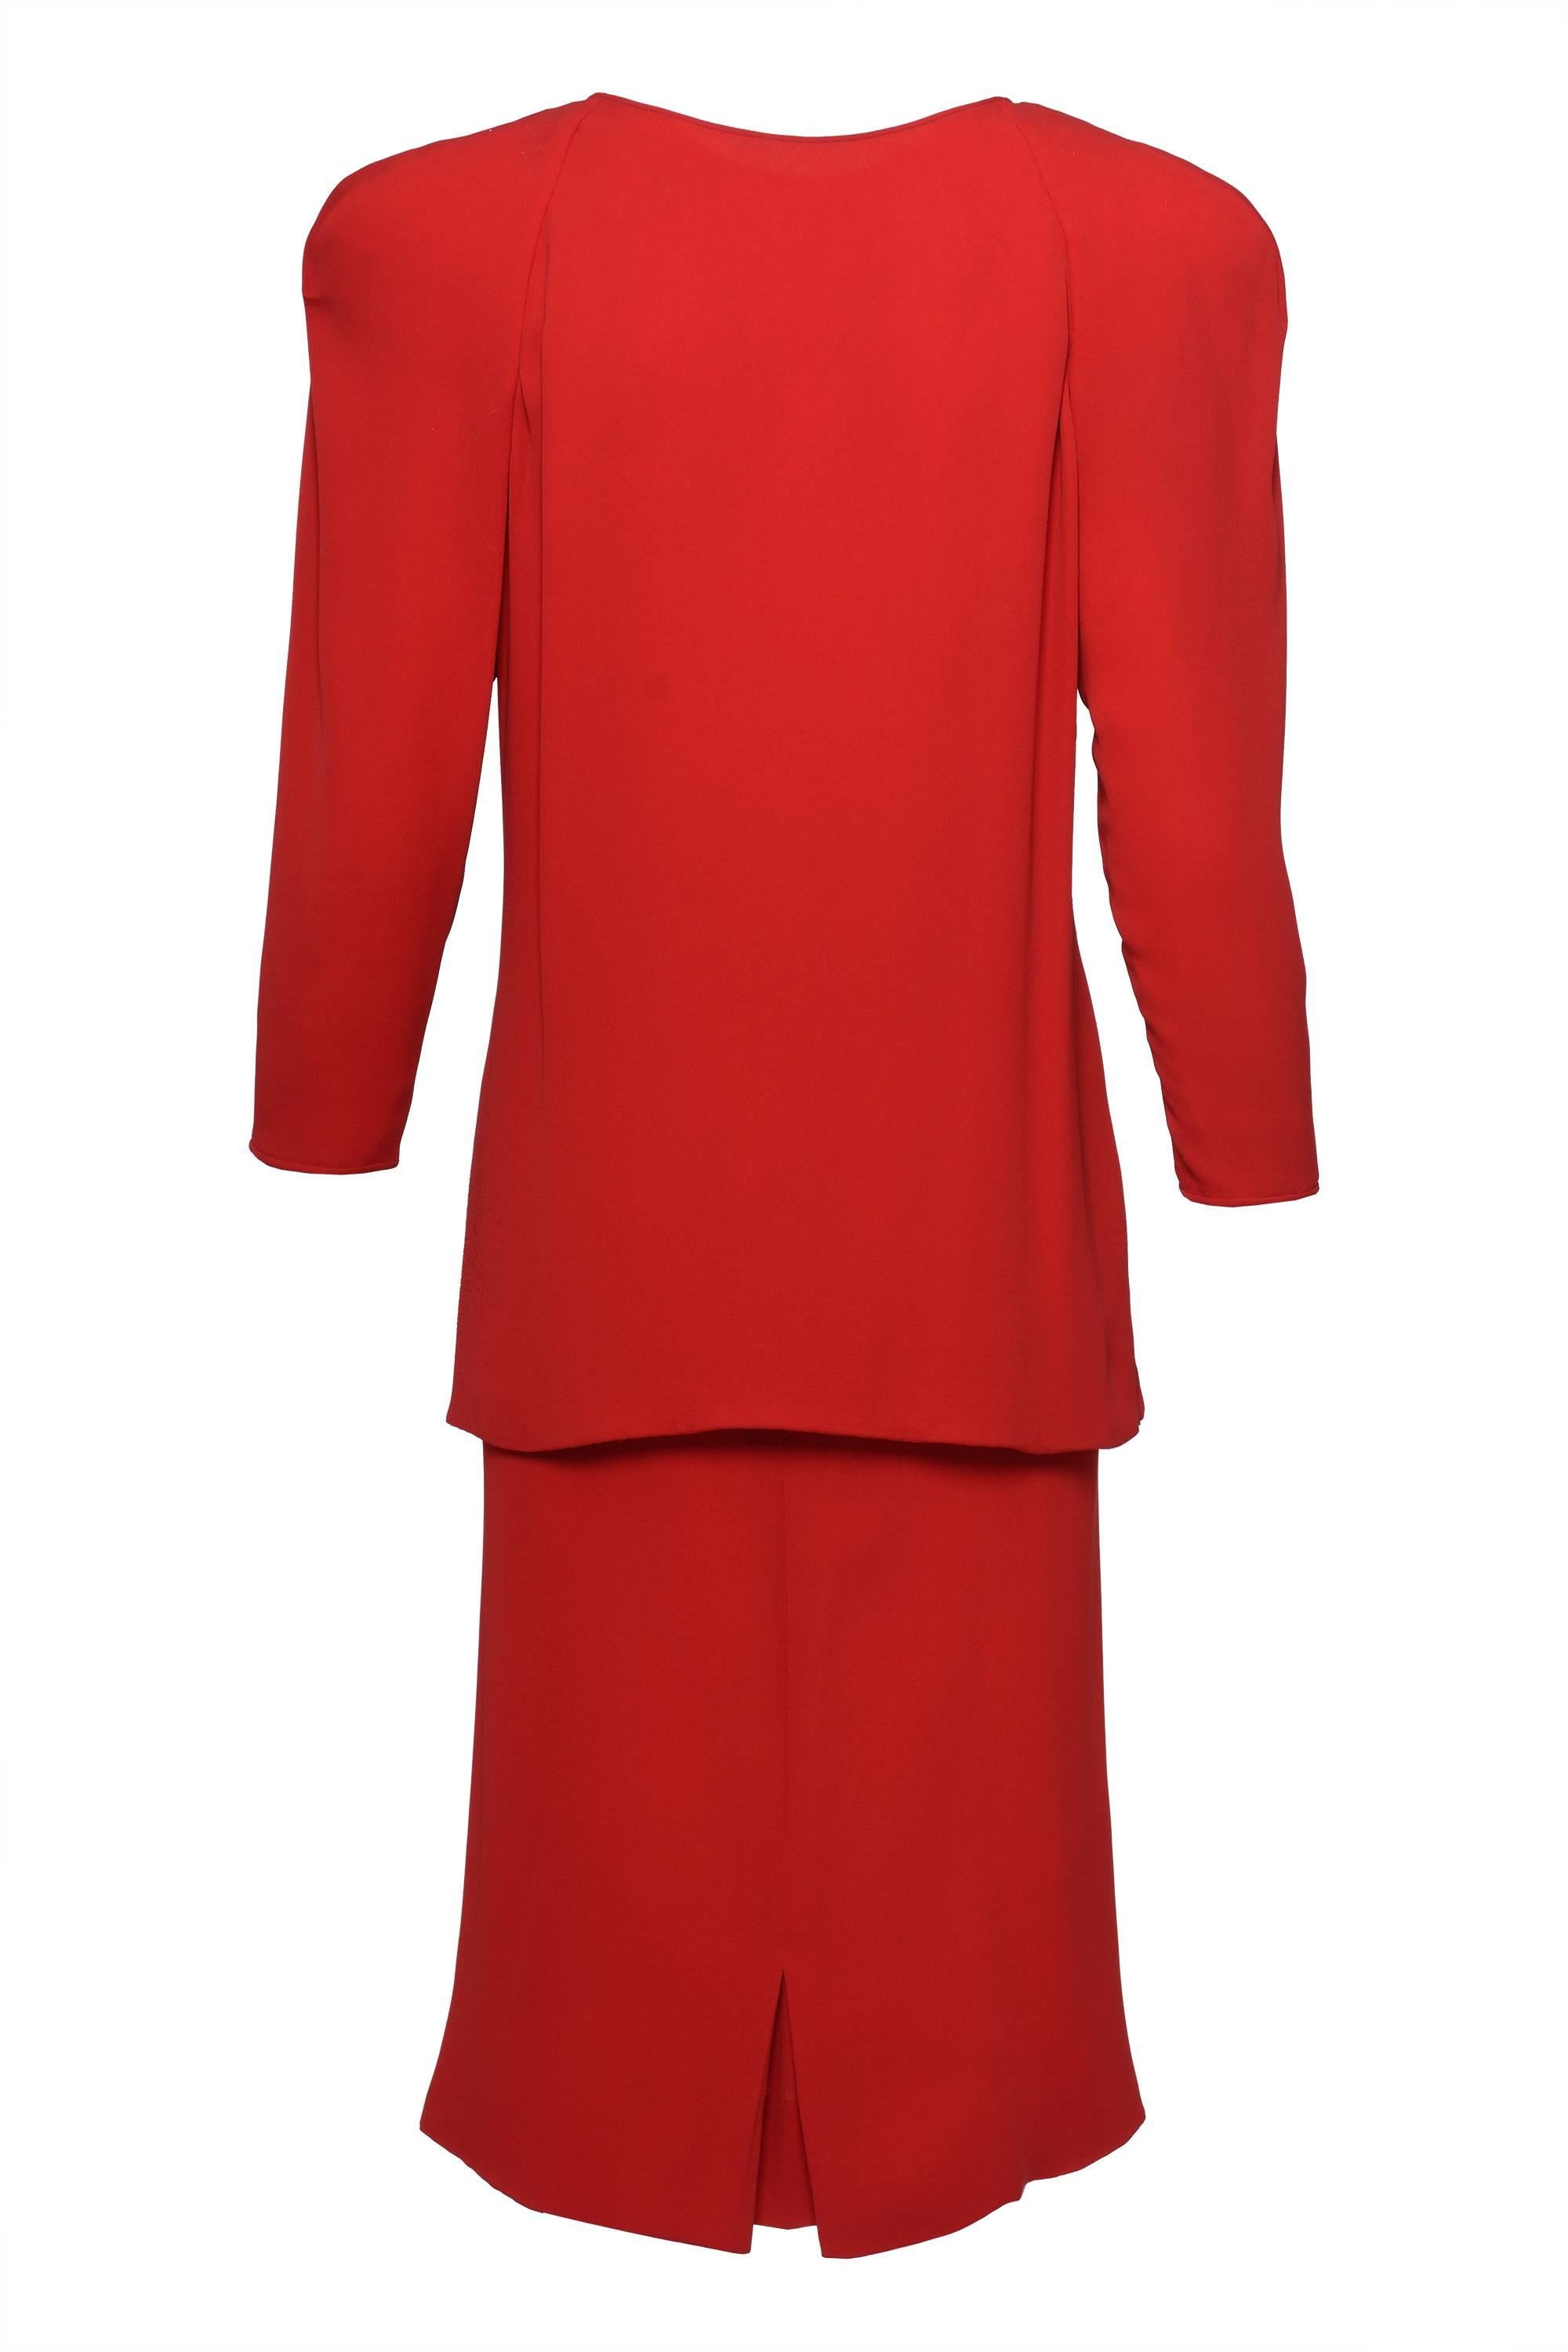 This lovely 1980s Suit dress of VALENTINO COUTURE is in a red rayon with  velvet bow. The blouse shirt has a dropped with a bow side zip closure , a deep v-neckline and padded shoulders. The Skirt has a back zip and hook and eye closure. 

Excellent